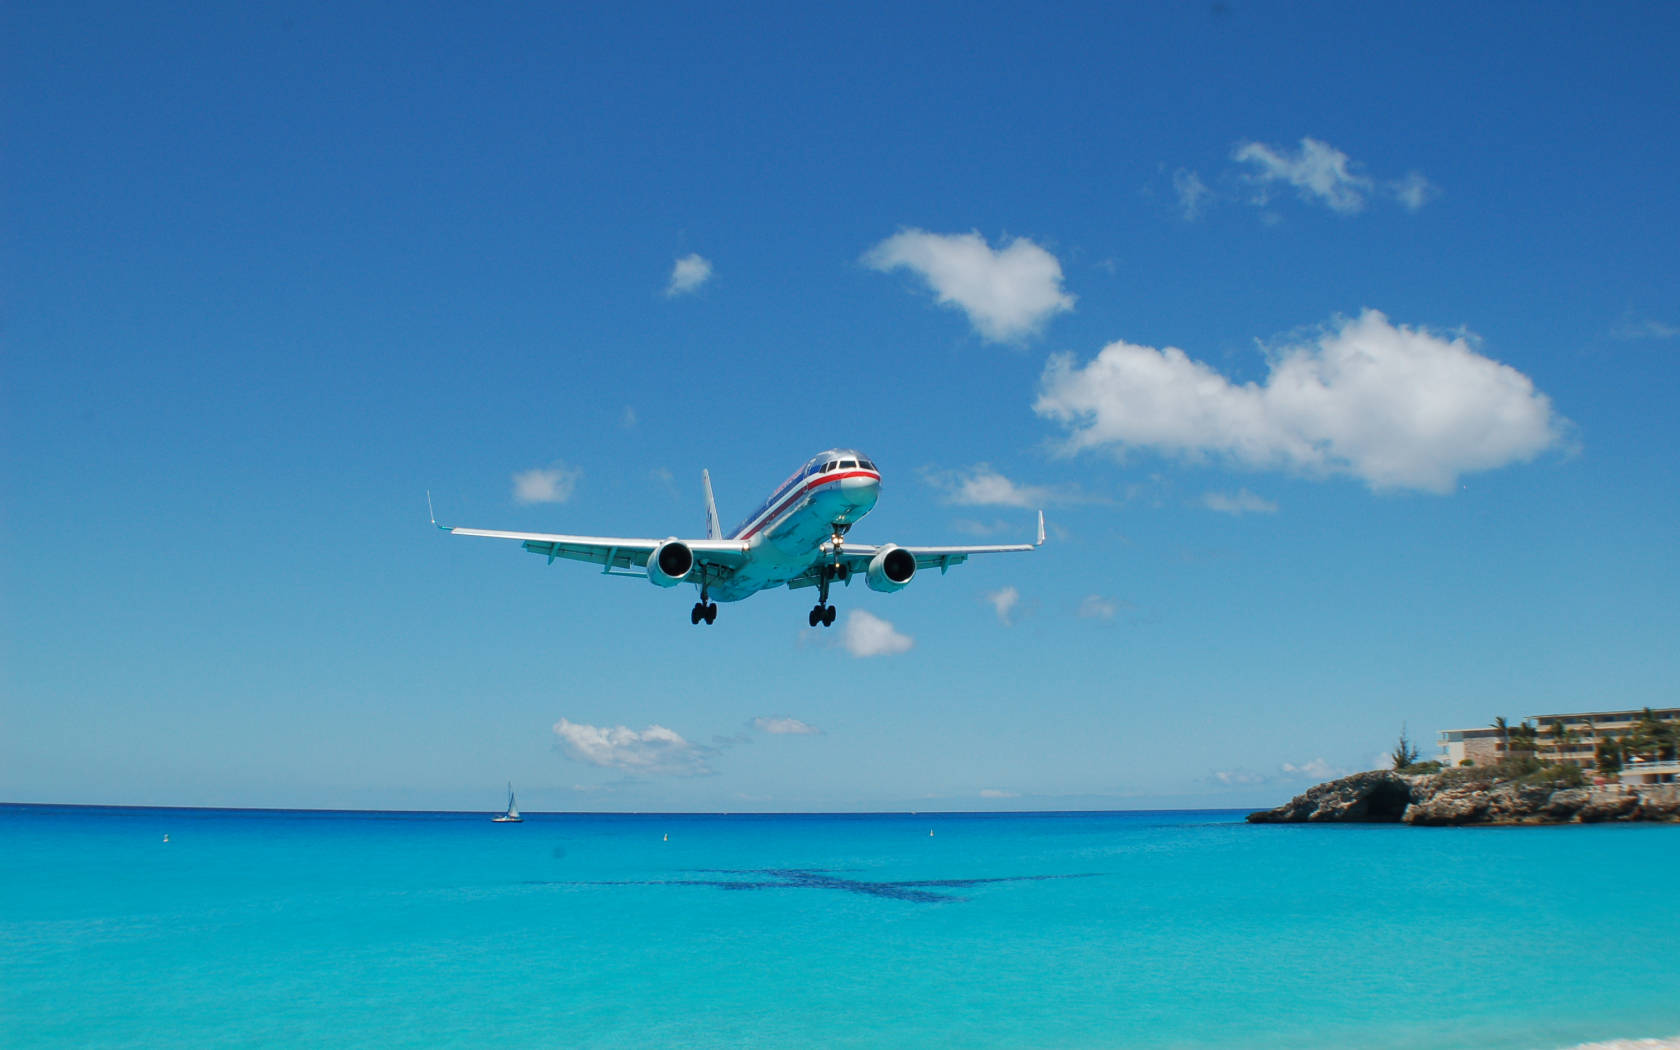 Hd Plane Flying Over Beach Background